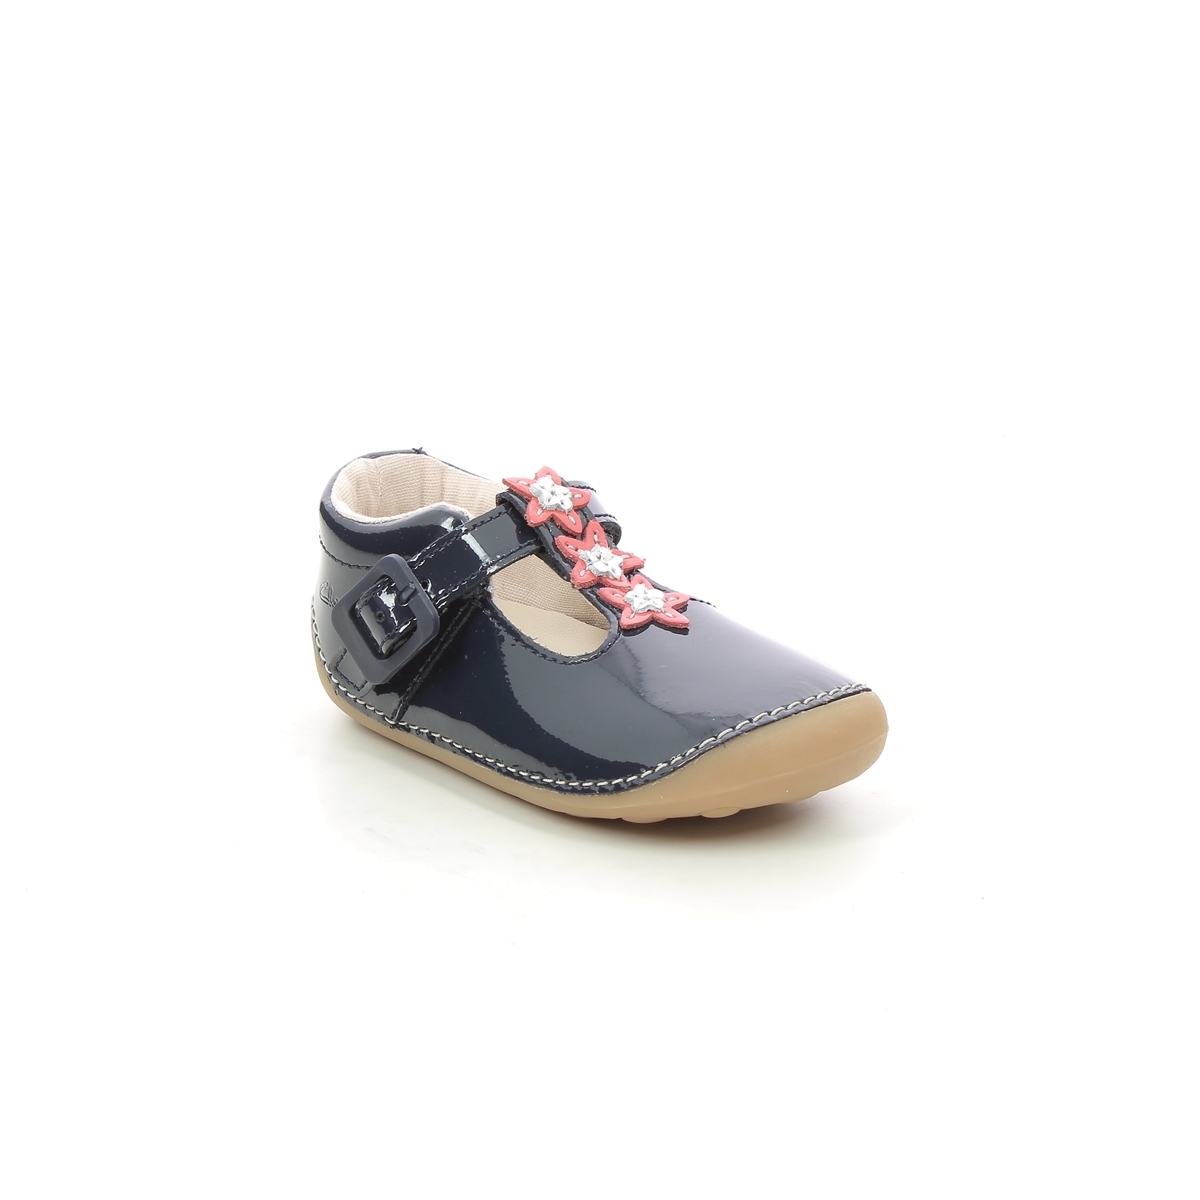 Clarks Tiny Flower T Navy patent Kids girls first and baby shoes 6257-77G in a Plain Leather in Size 3